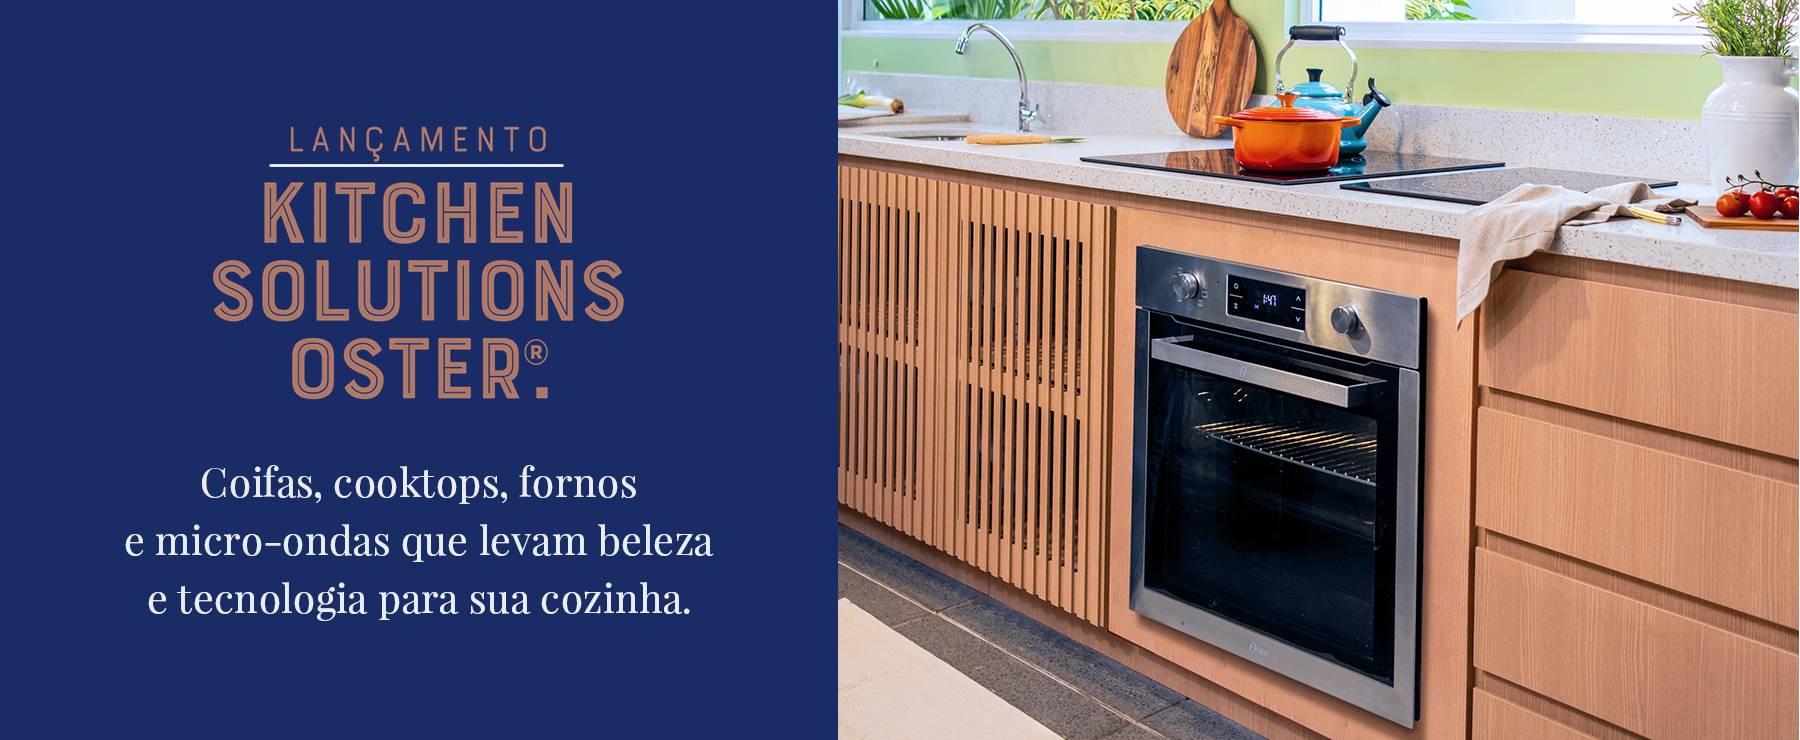 Linha Kitchen Solutions Oster | WestwingNow